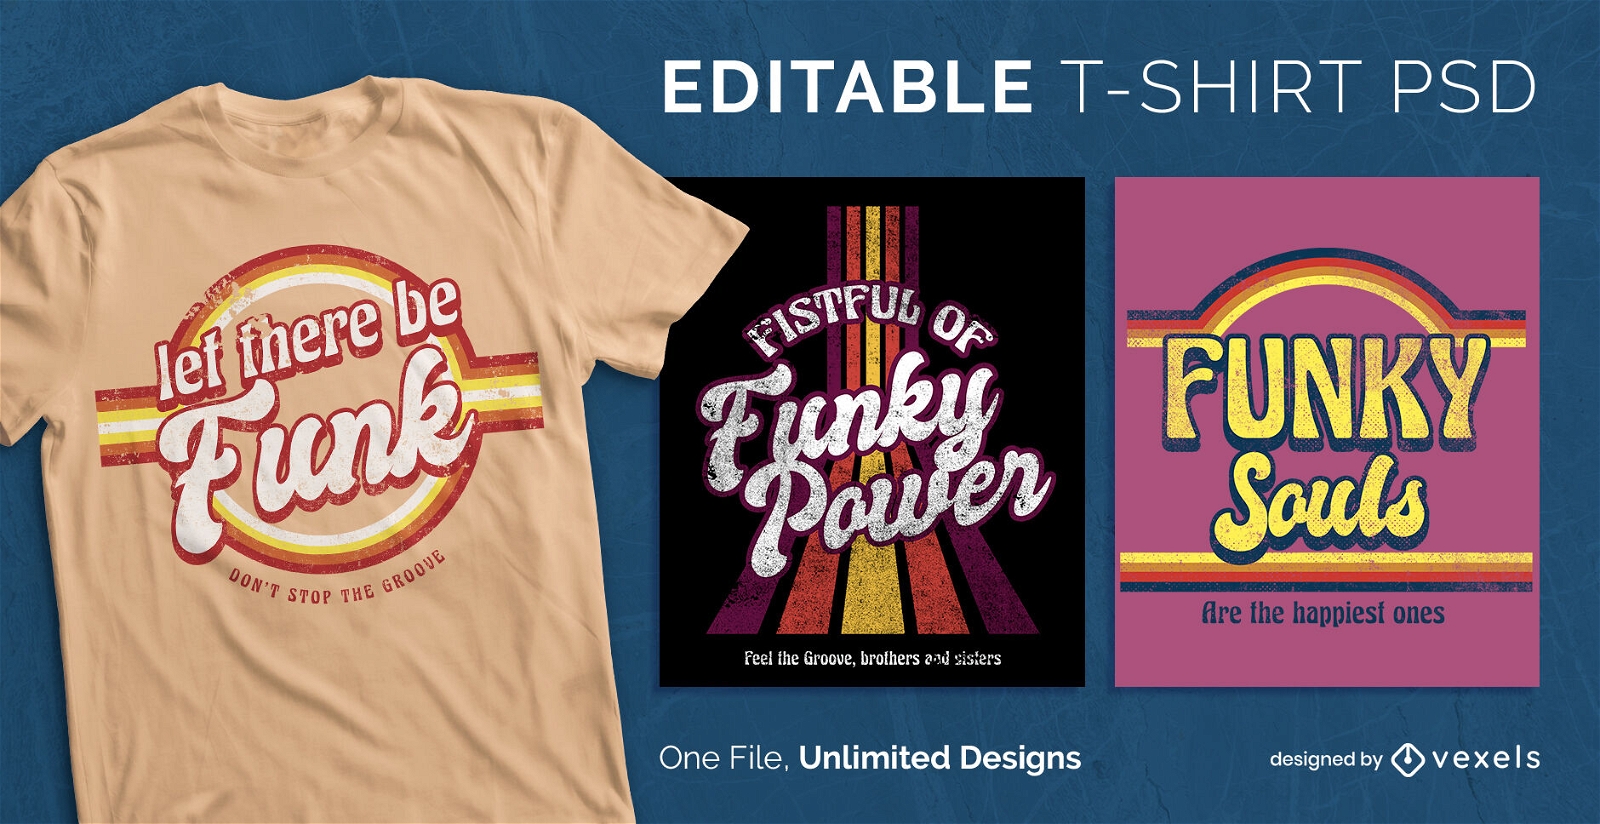 60s retro funky scalable t-shirt psd